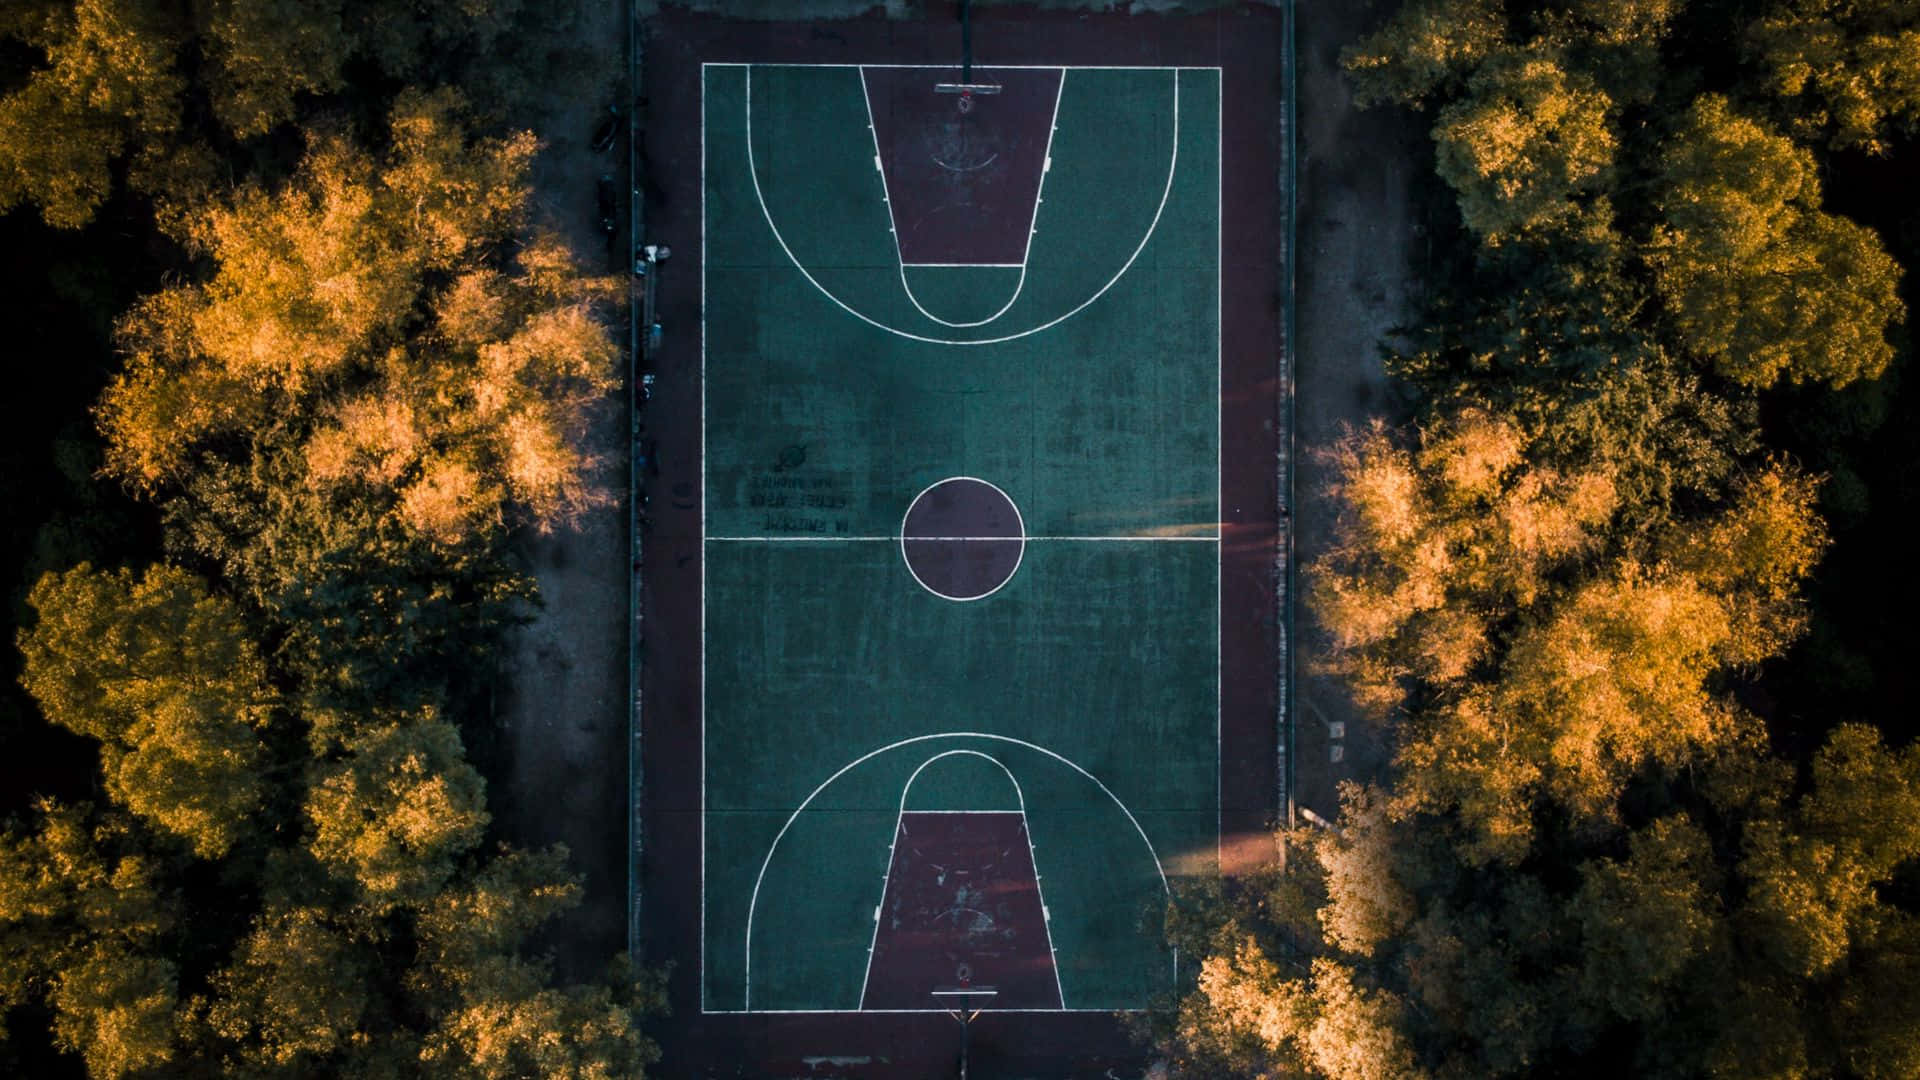 Aerial View Of A Basketball Court In The Park